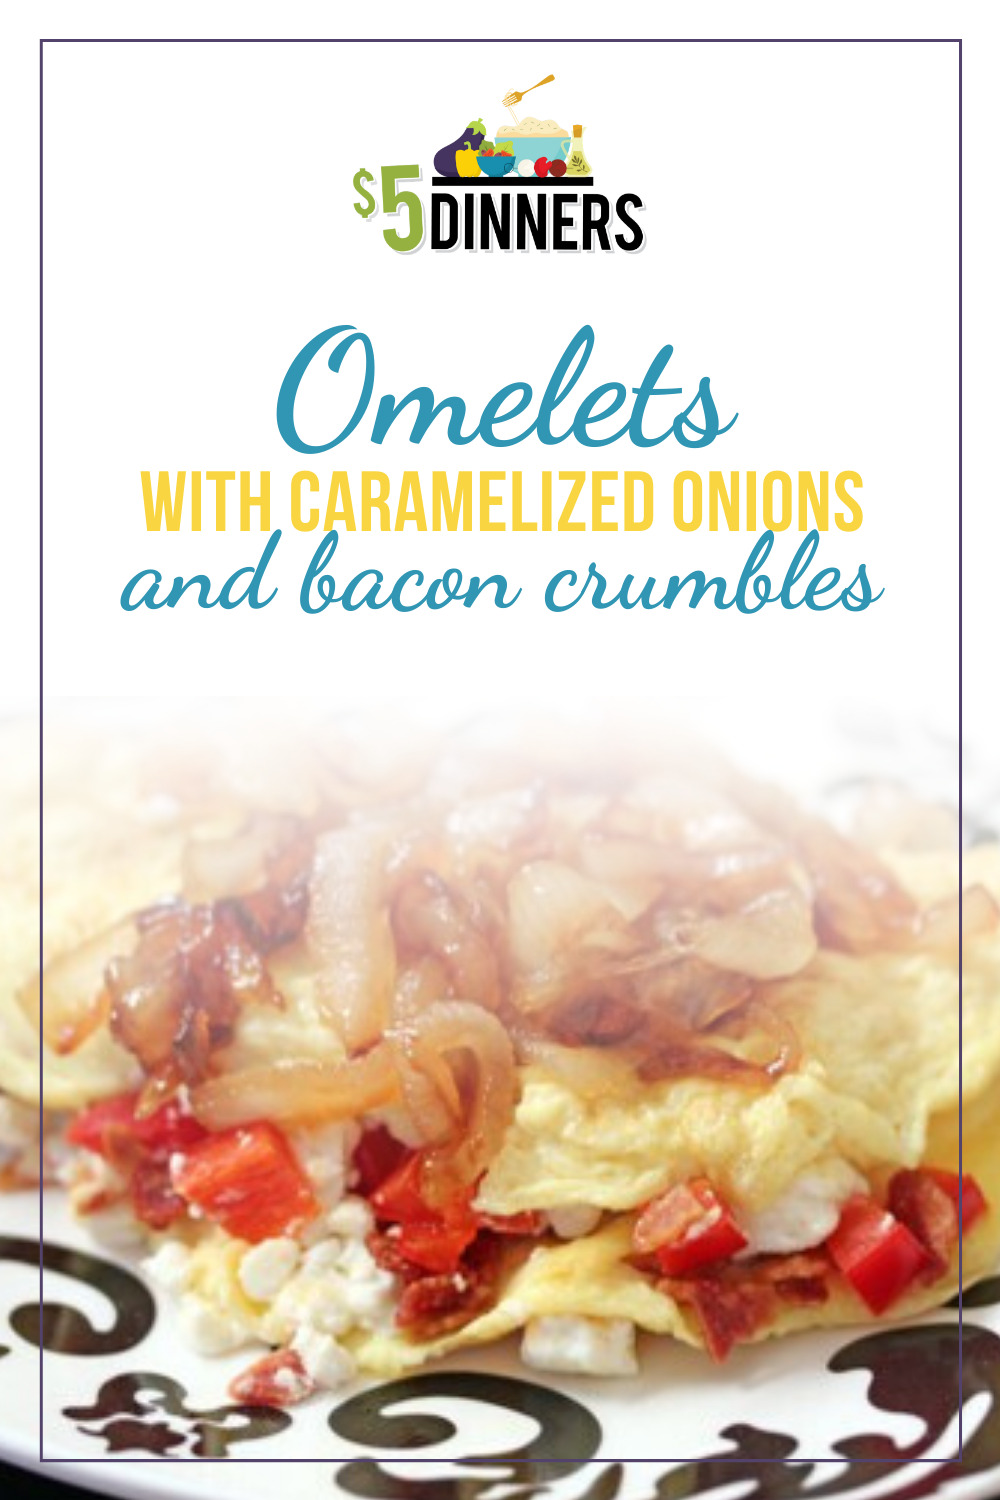 omelets with caramelized onions and bacon crumbles recipe